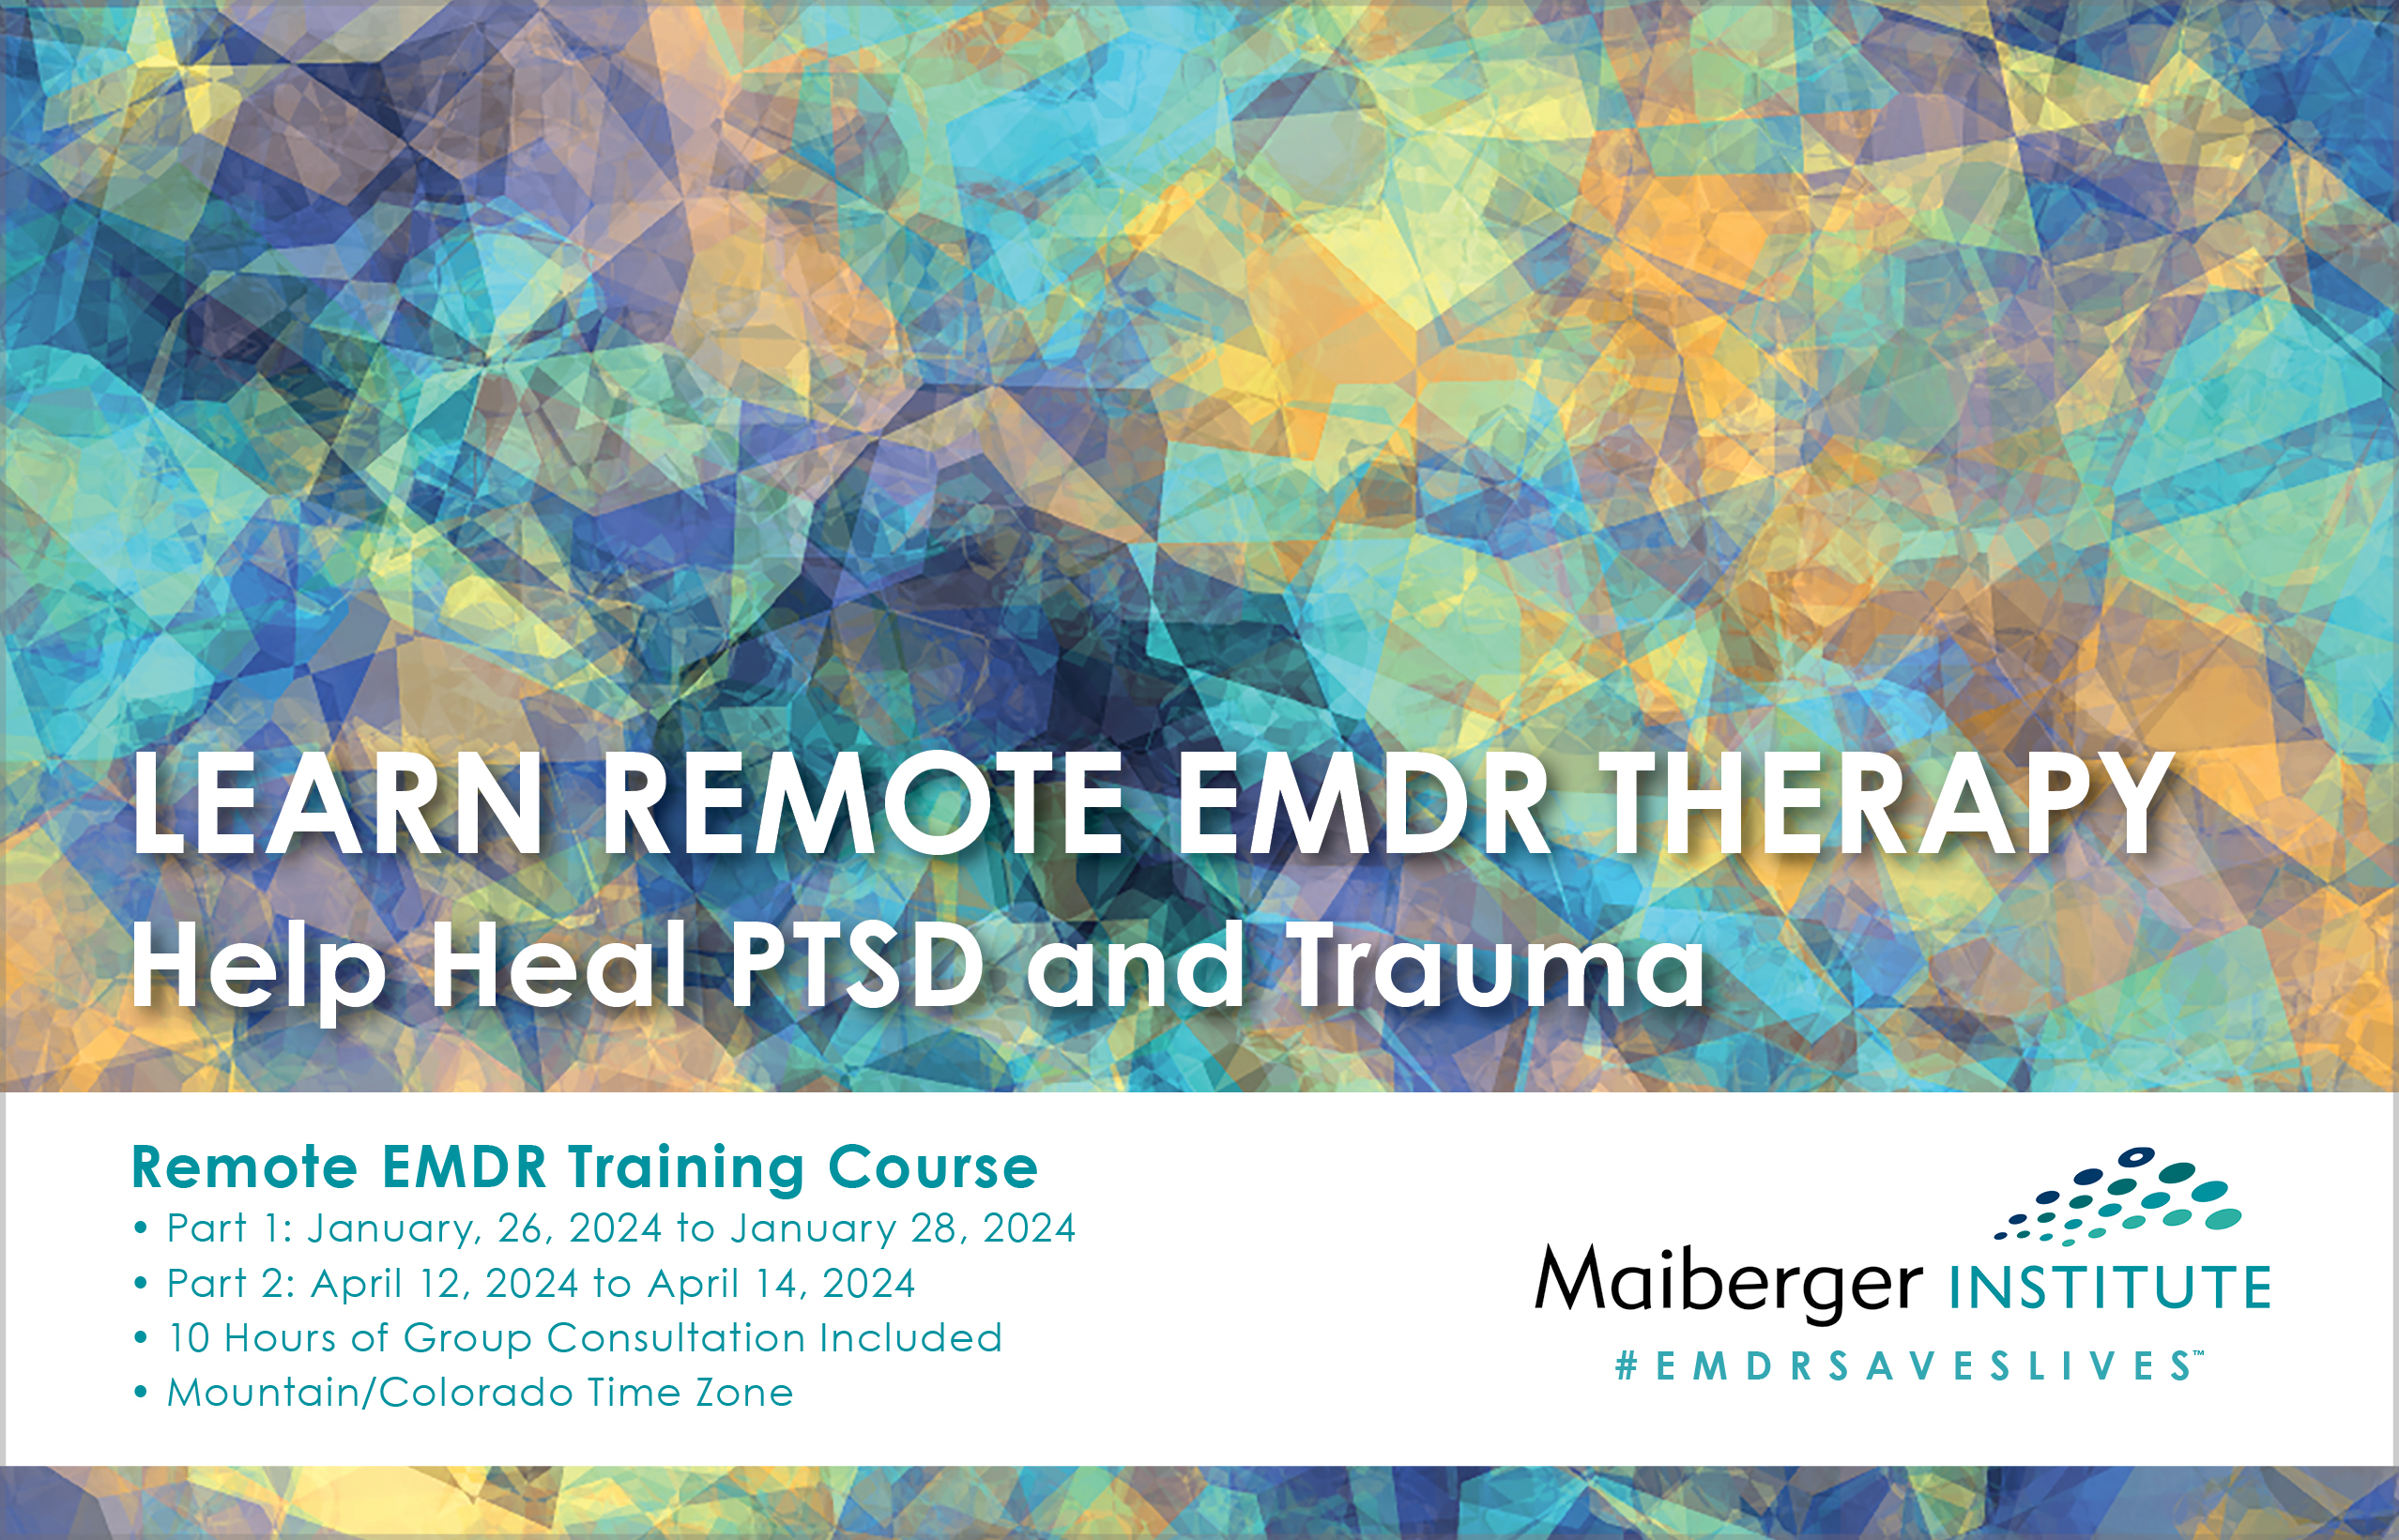 Complete Remote EMDR Training Course - Part 1: January, 26, 2024 to January 28, 2024 - Part 2: April 12, 2023 to April 14, 2024 - 10 Hours of Group Consultation Included - Mountain Time Zone (Colorado Time) - Maiberger Institute - Instagram - Maiberger Institute - EMDR Events Calendar